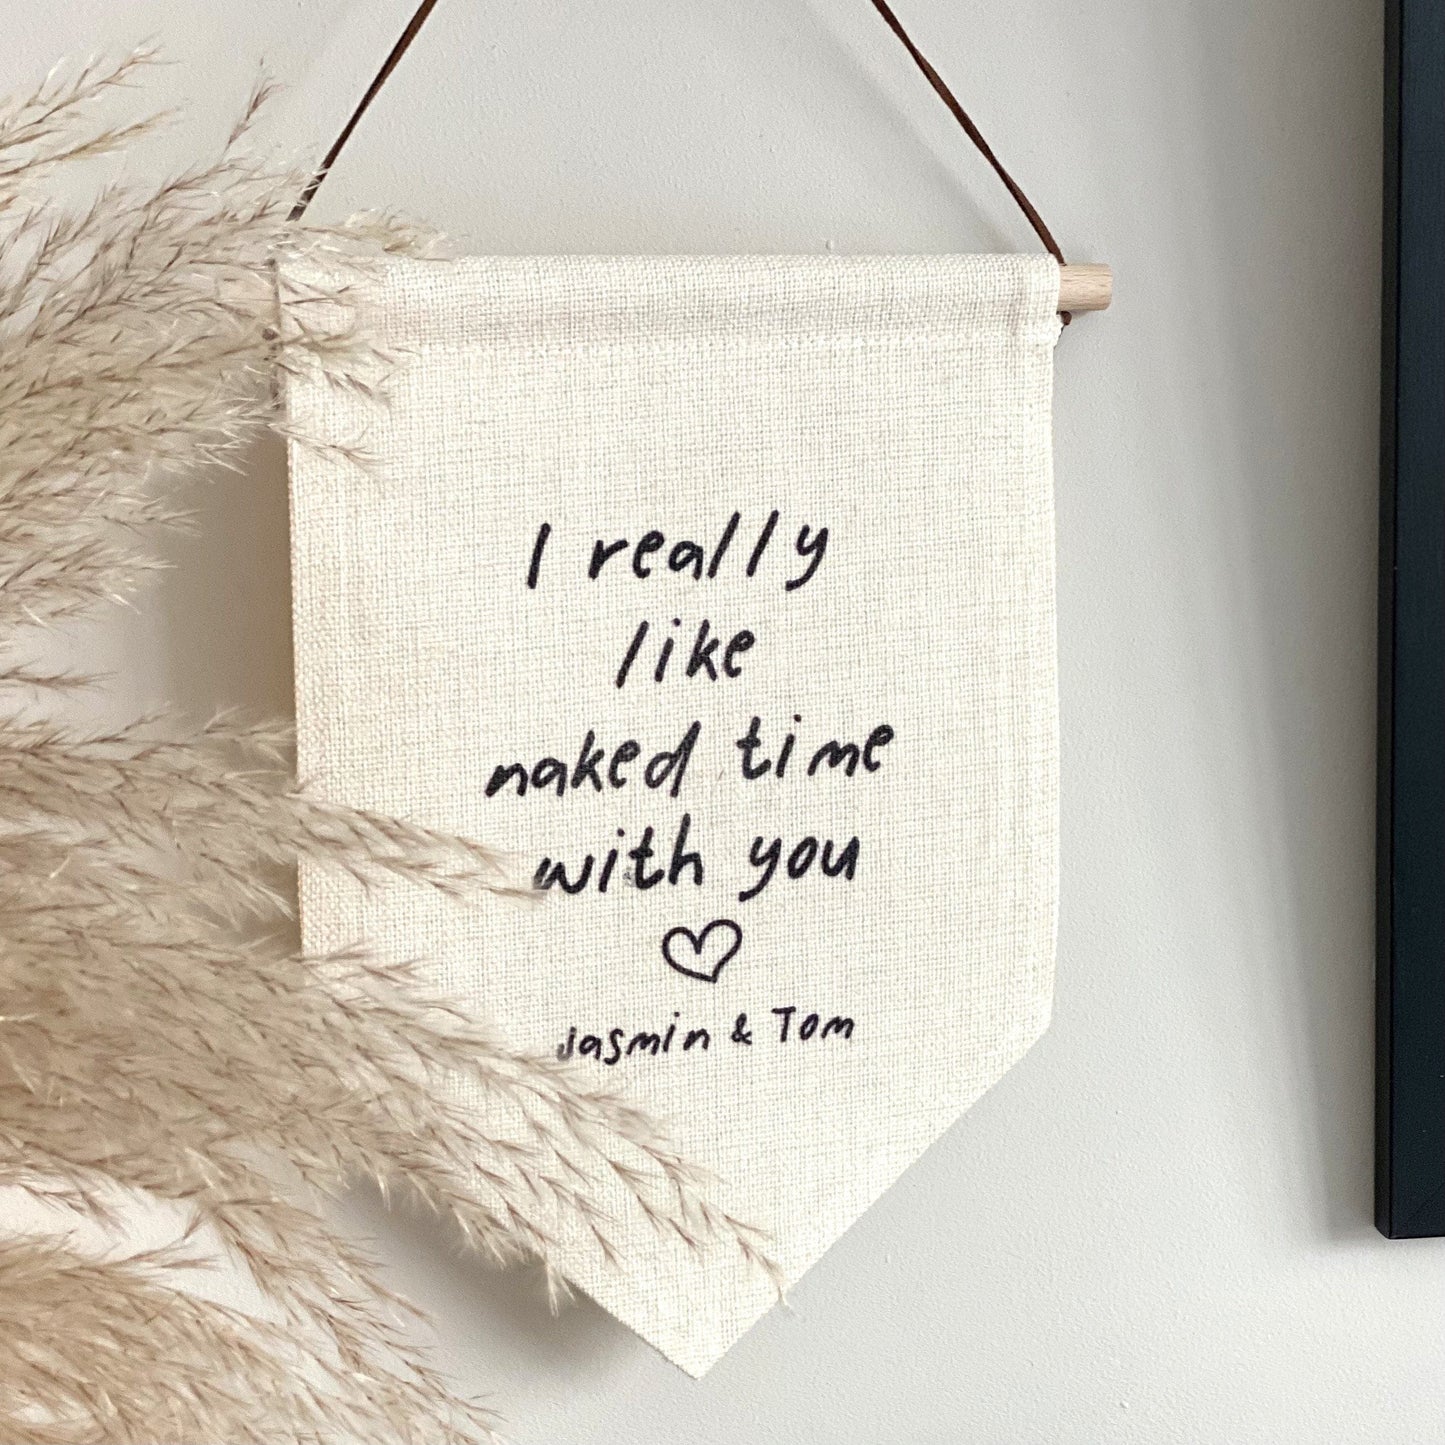 I Like Naked Time With You Bedroom Hanging Banner